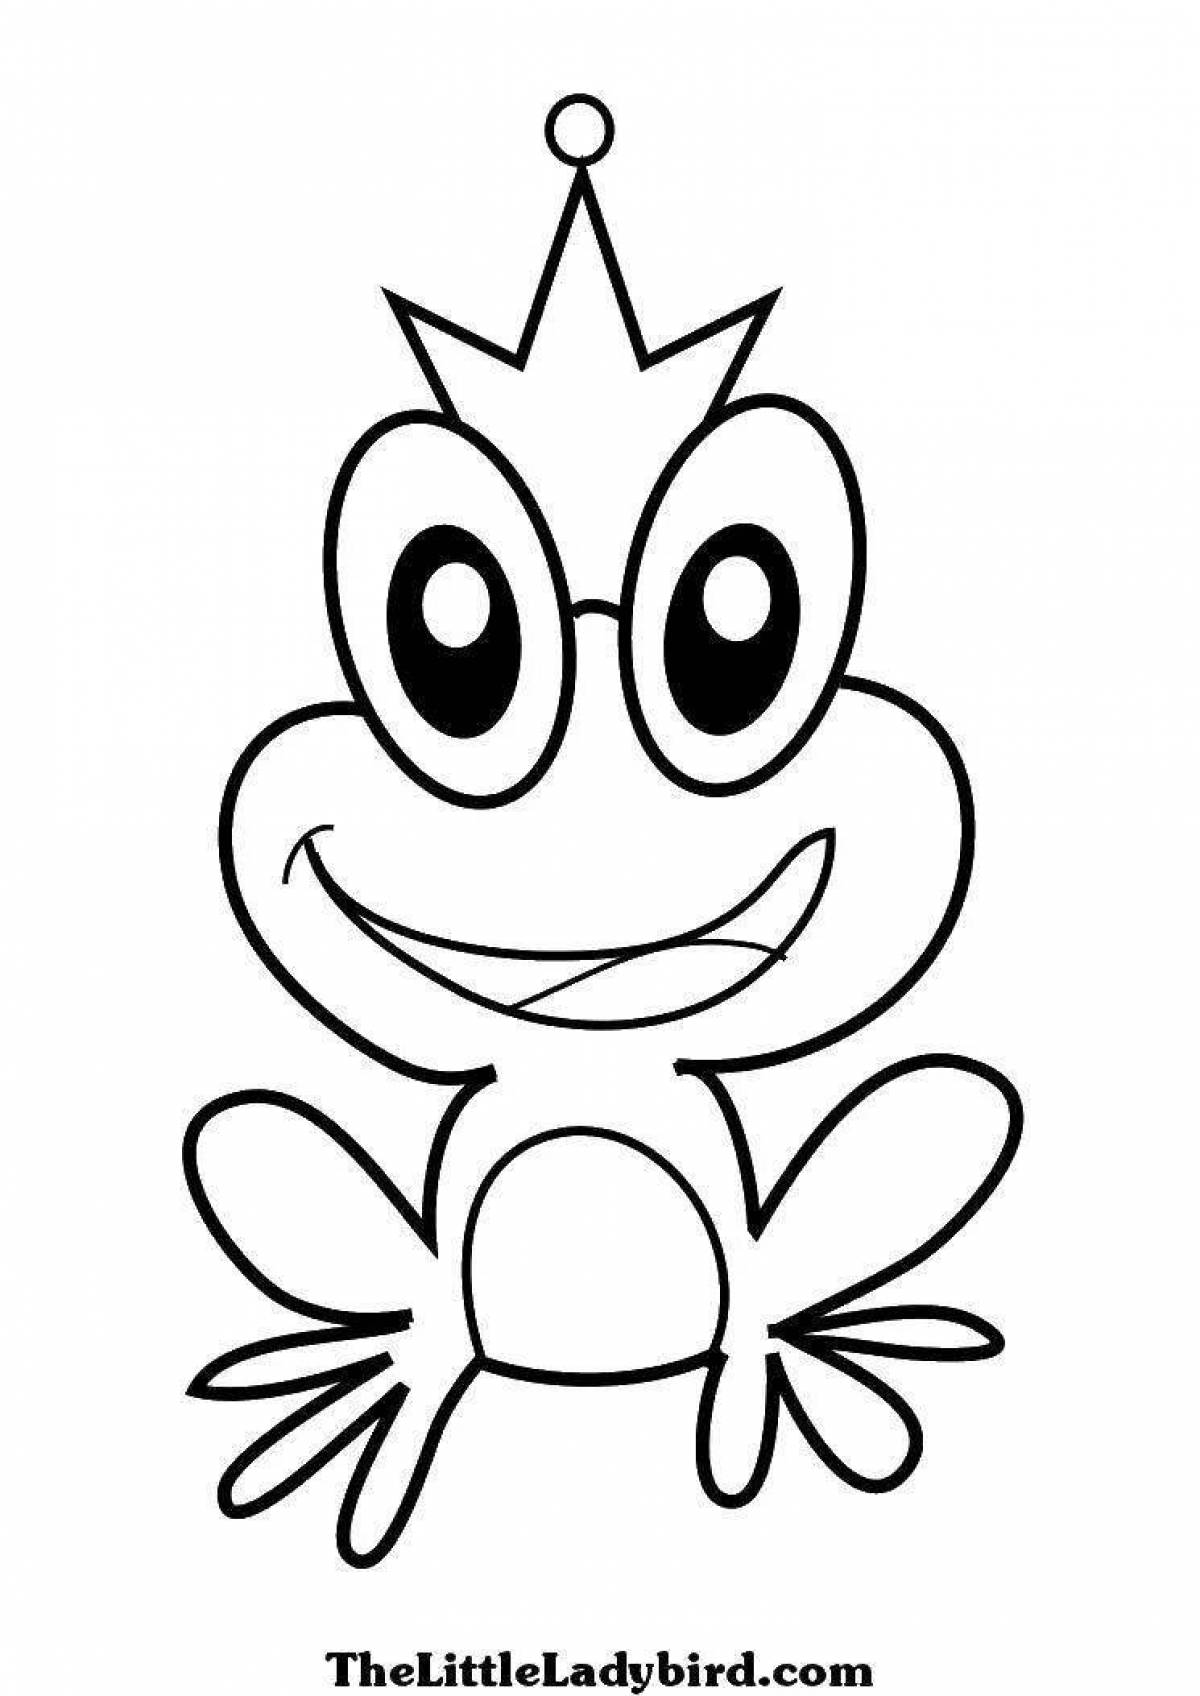 Frog princess dynamic coloring book for kids